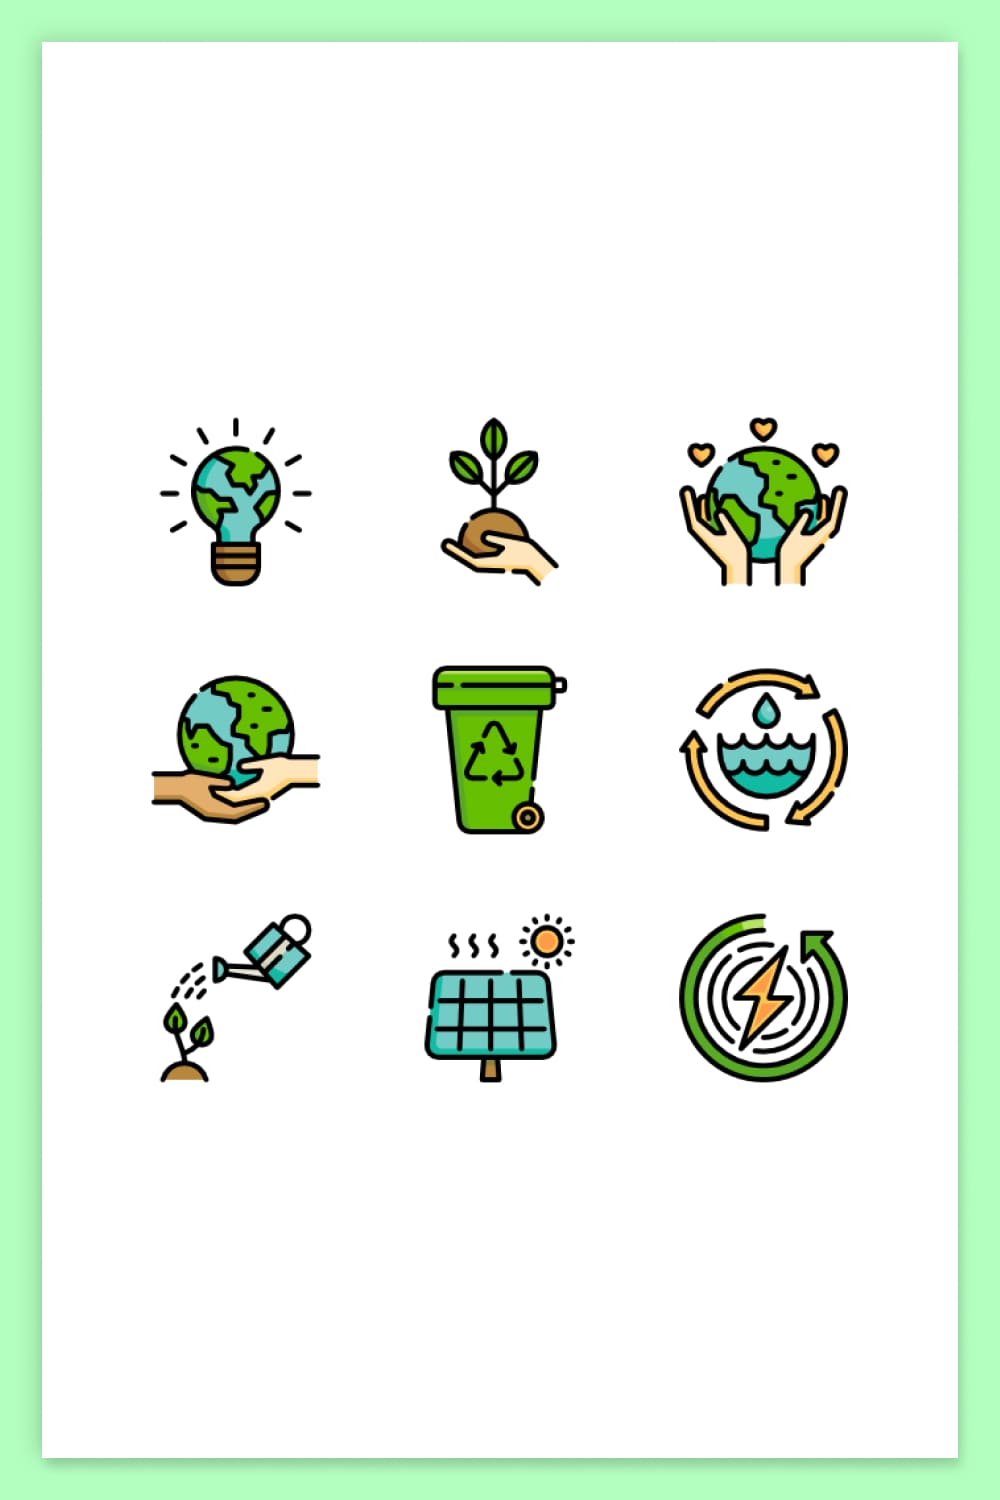 Collage of planet and renewable energy icons.